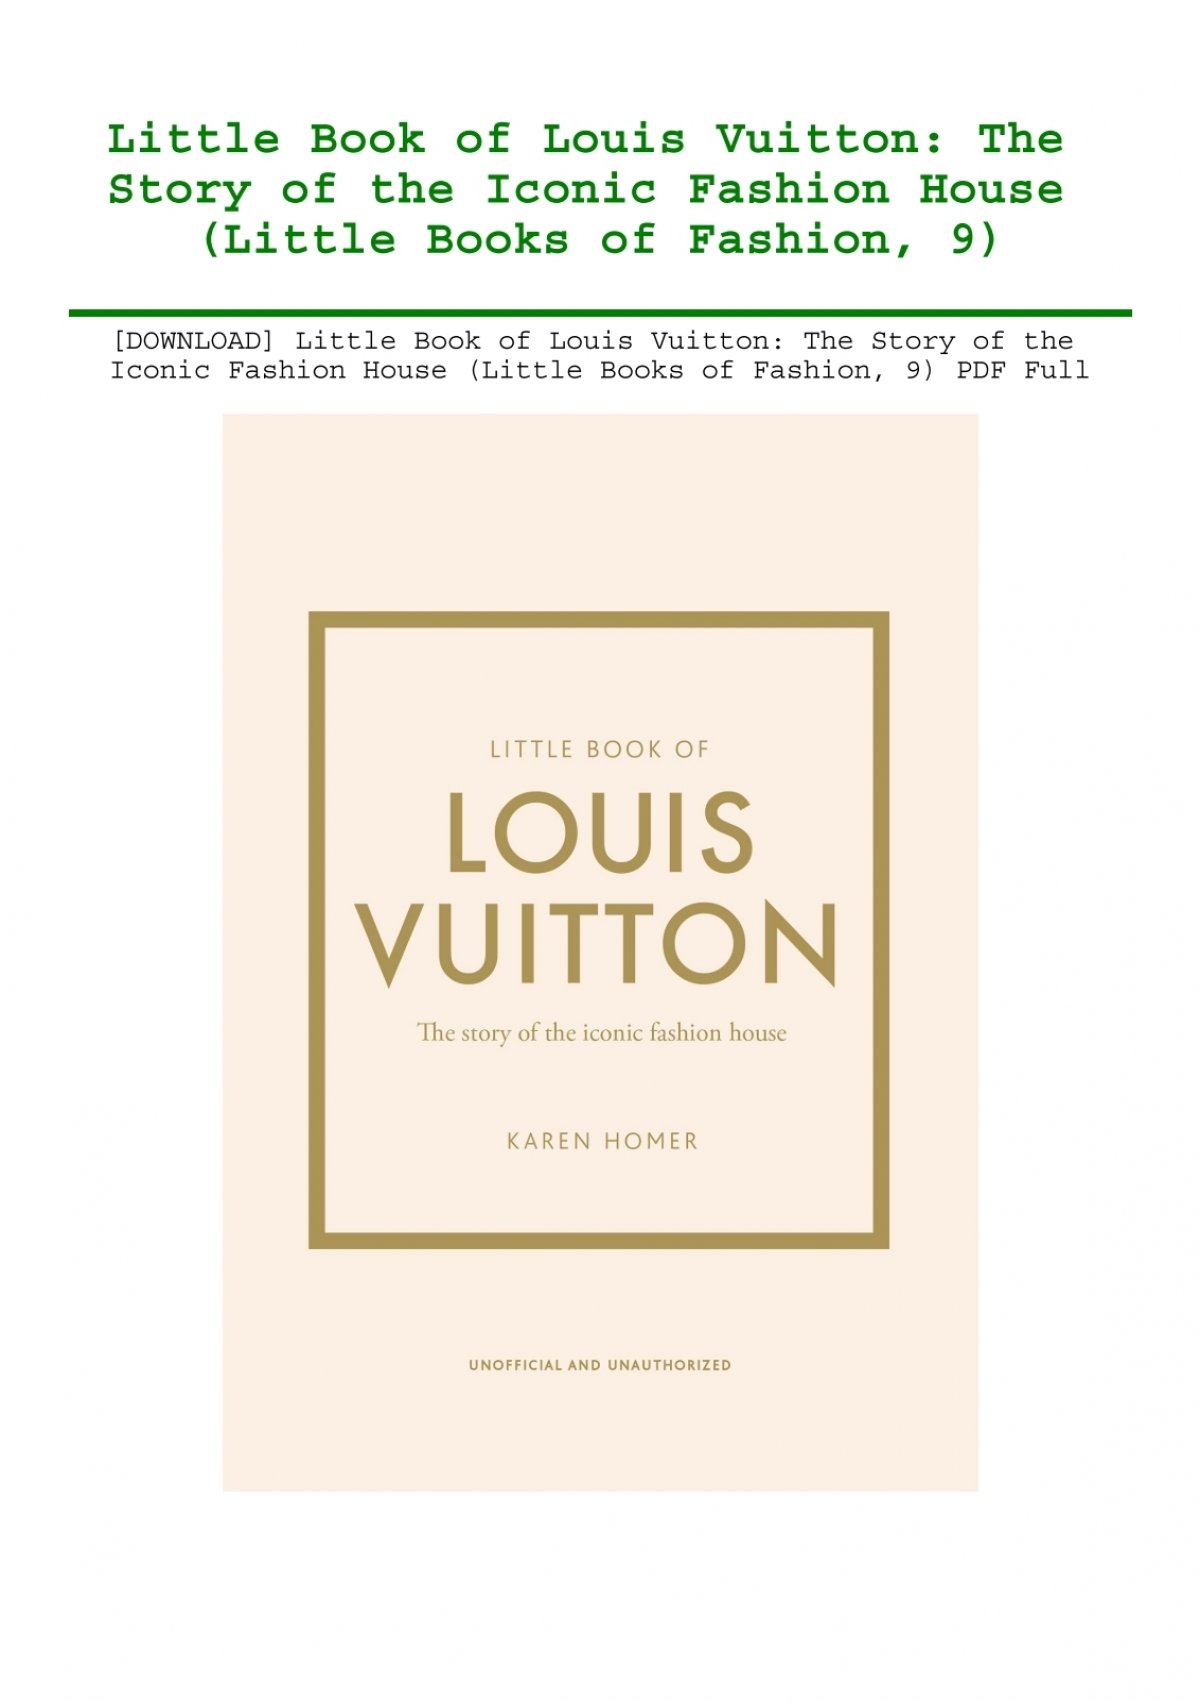 DOWNLOAD] Little Book of Louis Vuitton The Story of the Iconic Fashion House  (Little Books of Fashion 9) PDF Full